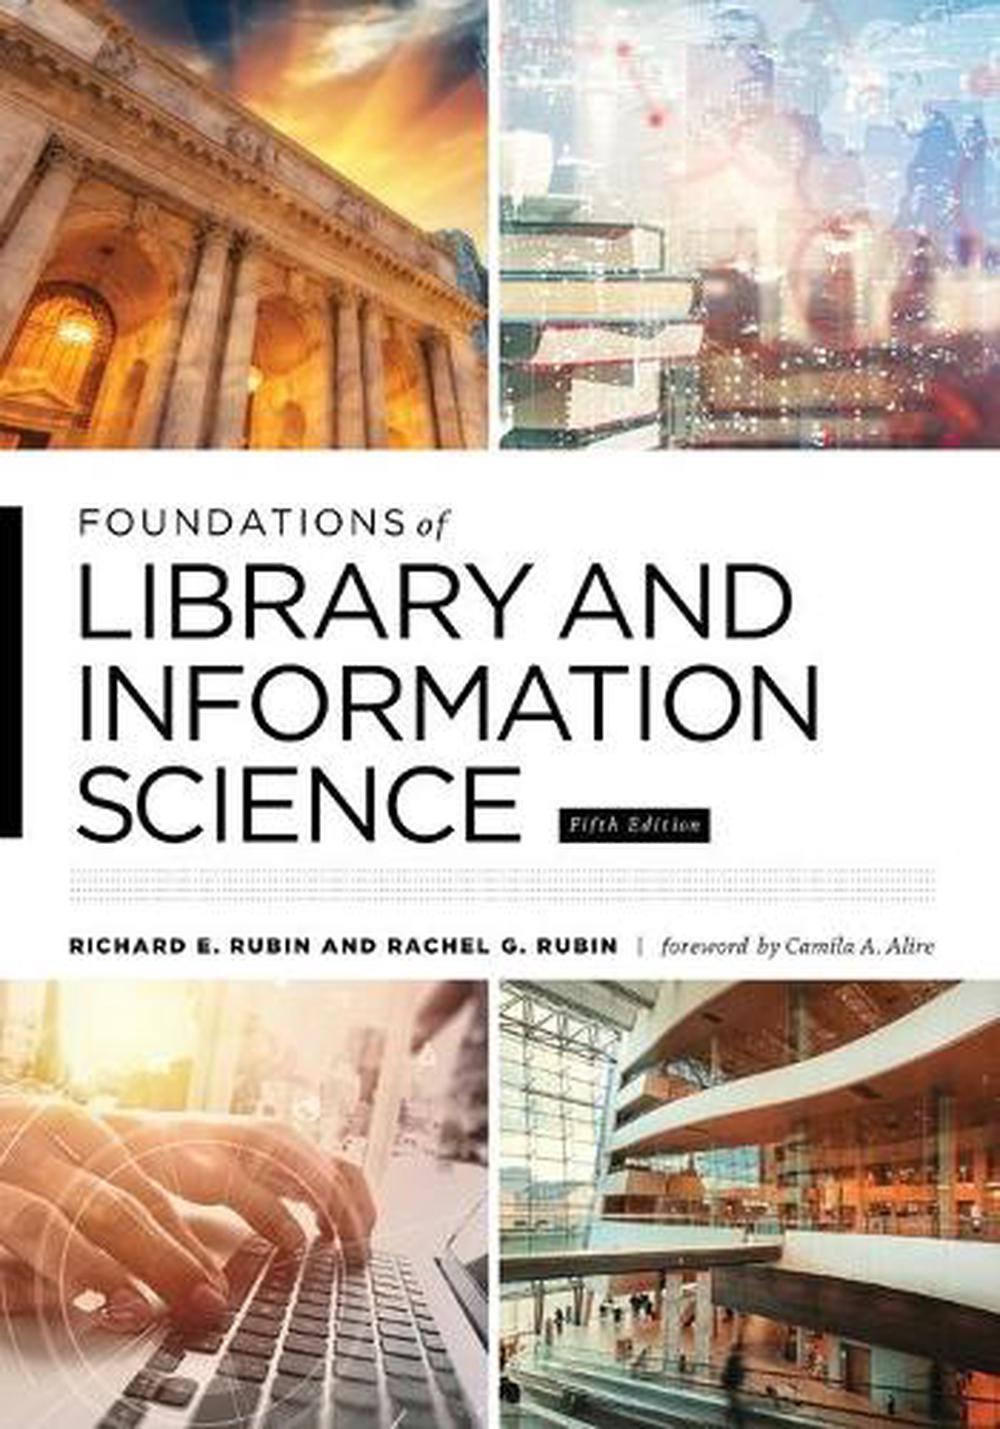 library information science thesis topics